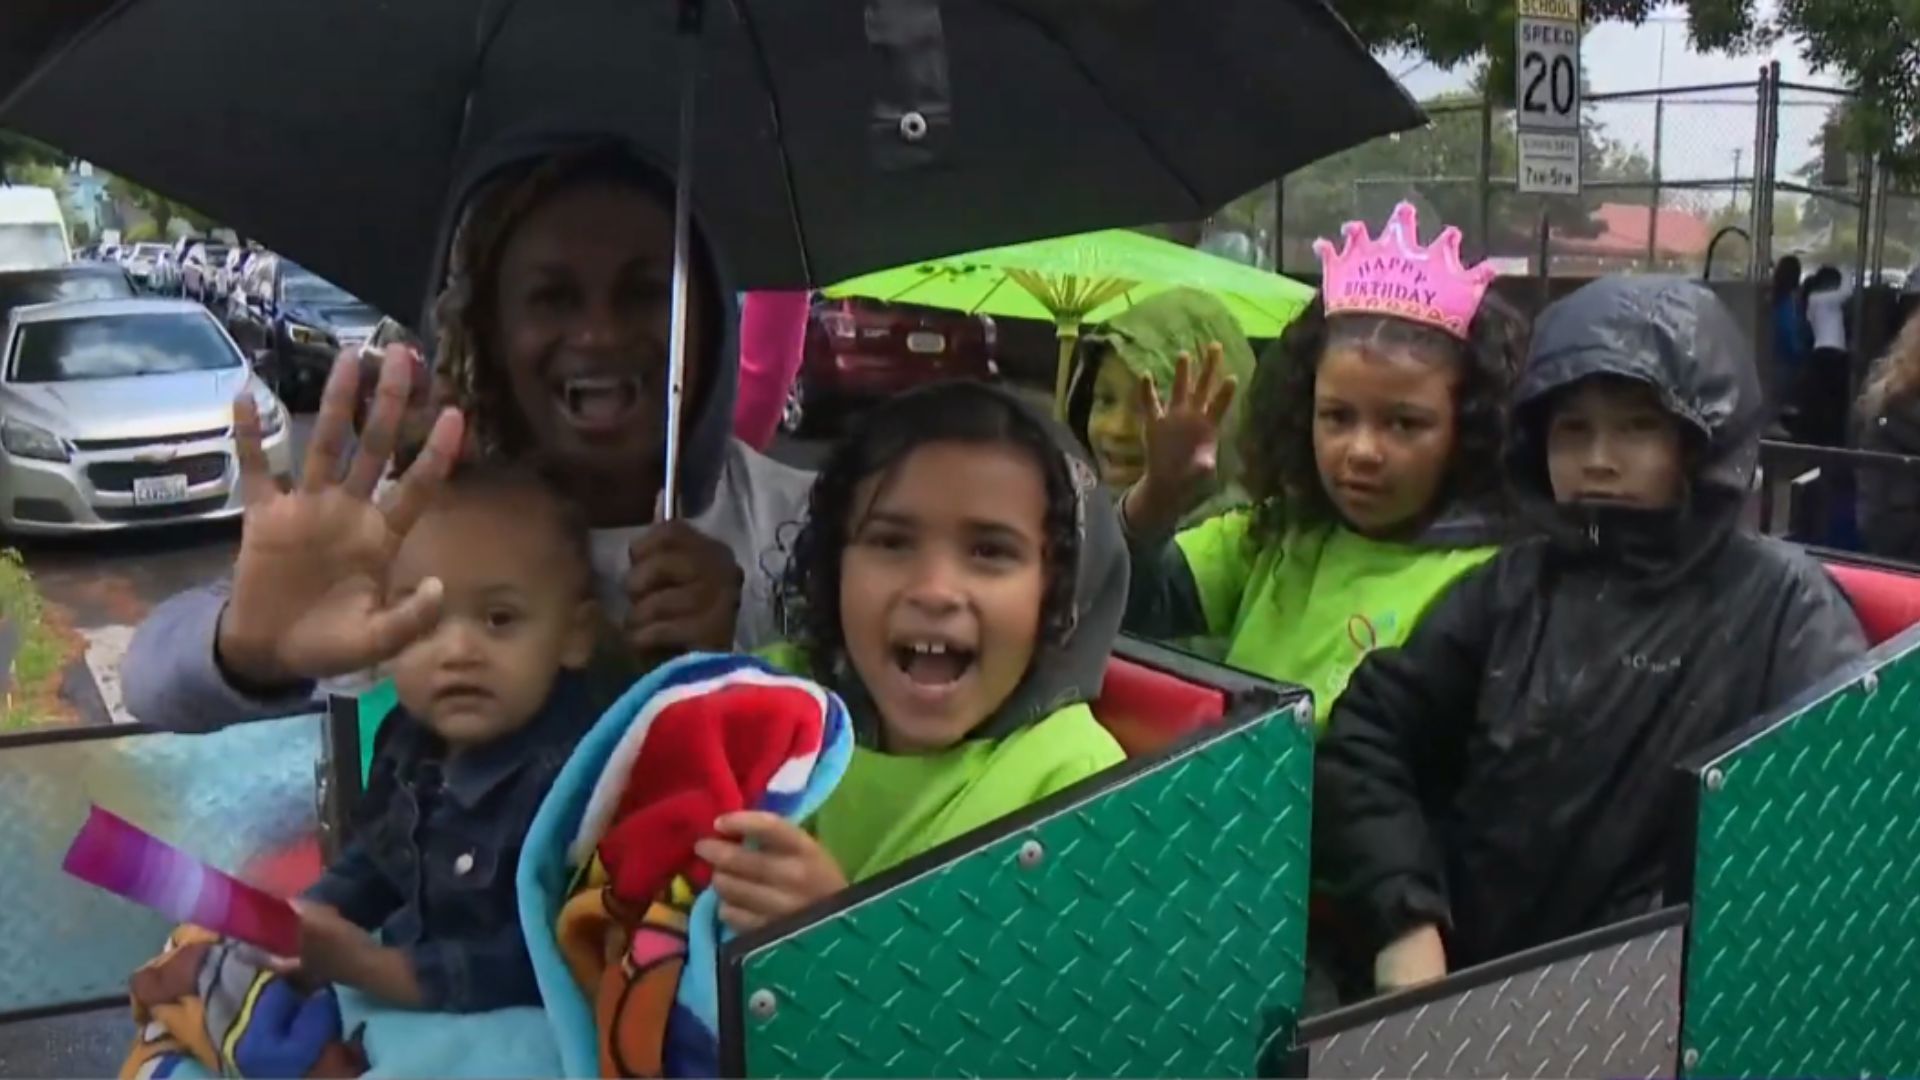 Around 1,500 people marched along MLK Drive in honor of Juneteenth, celebrating not only the freedom of emancipated slaves but also Black leaders in Portland.